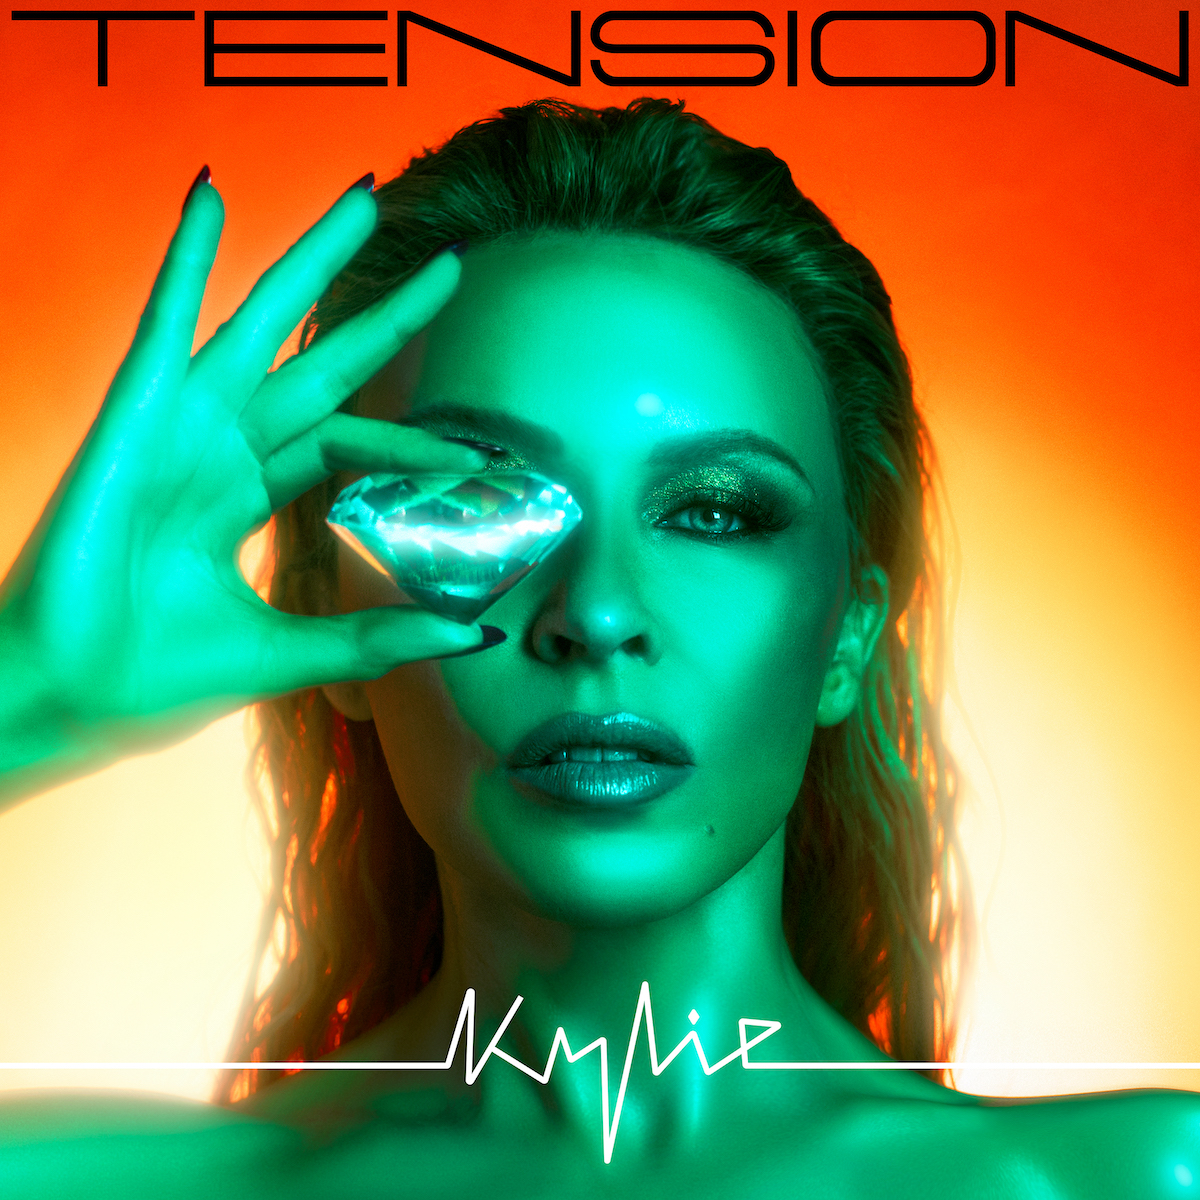 I've heard it & it's safe to say it's a collection of some of her finest work! The production is SUBLIME and THOSE TUNES!! SO MANY! Padam opens, and the last track Story, is probably the finest closer of any Kylie album! Pop perfection. Album AND Kylie🩷 @kylieminogue #tension